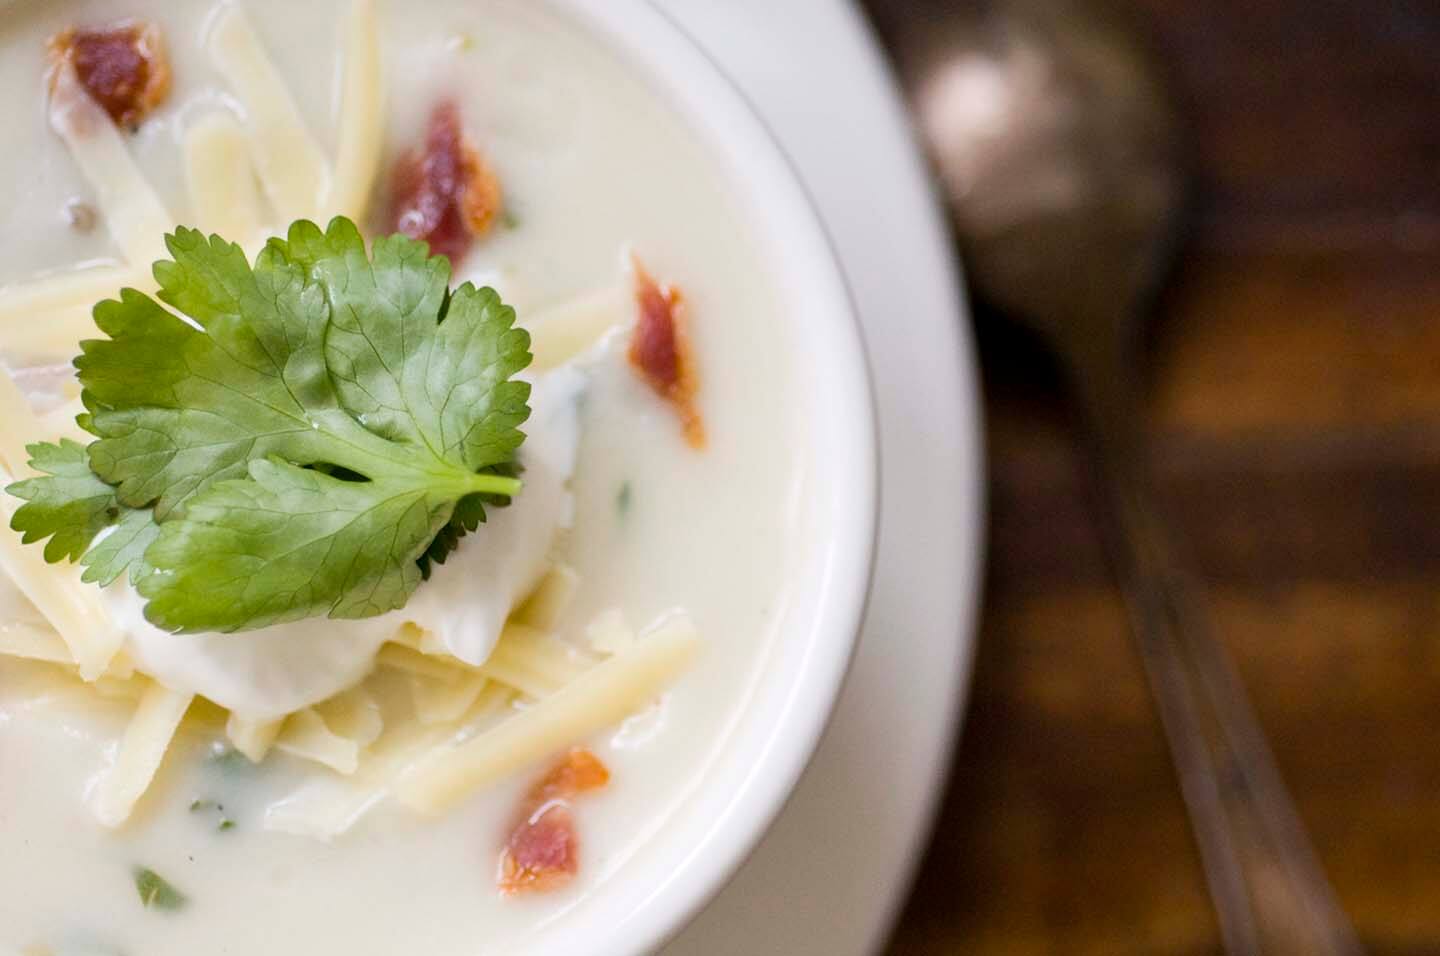 Buttermilk potato soup with bacon and roasted jalapeno | Homesick Texan